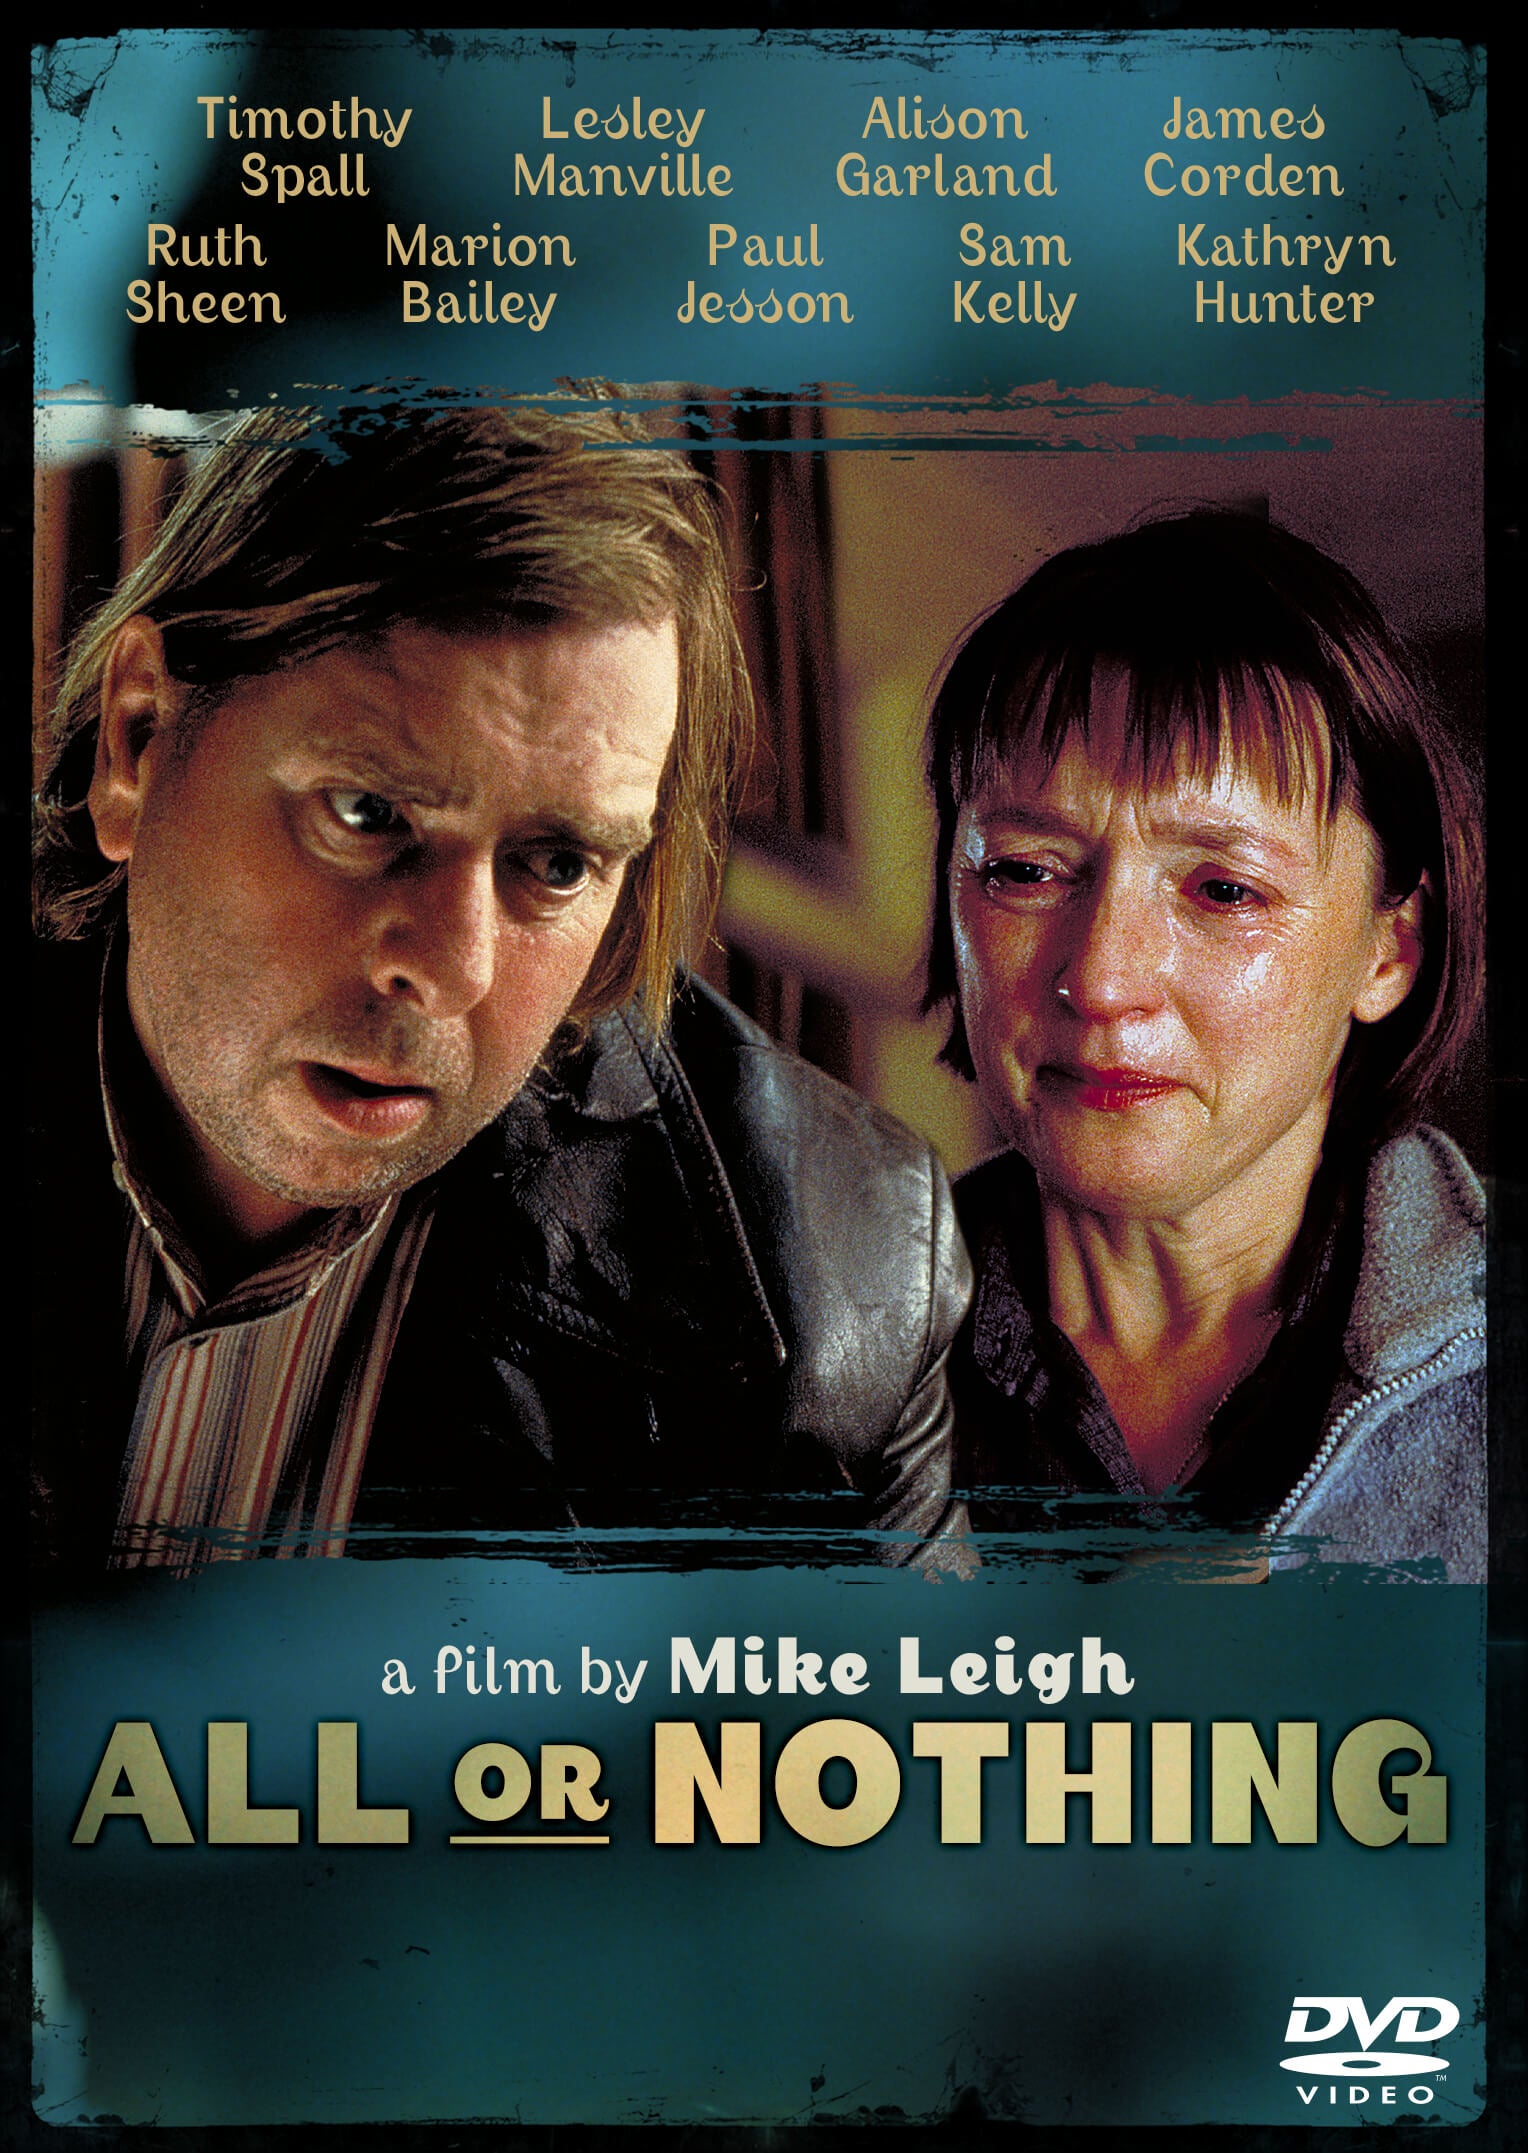 ALL OR NOTHING DVD